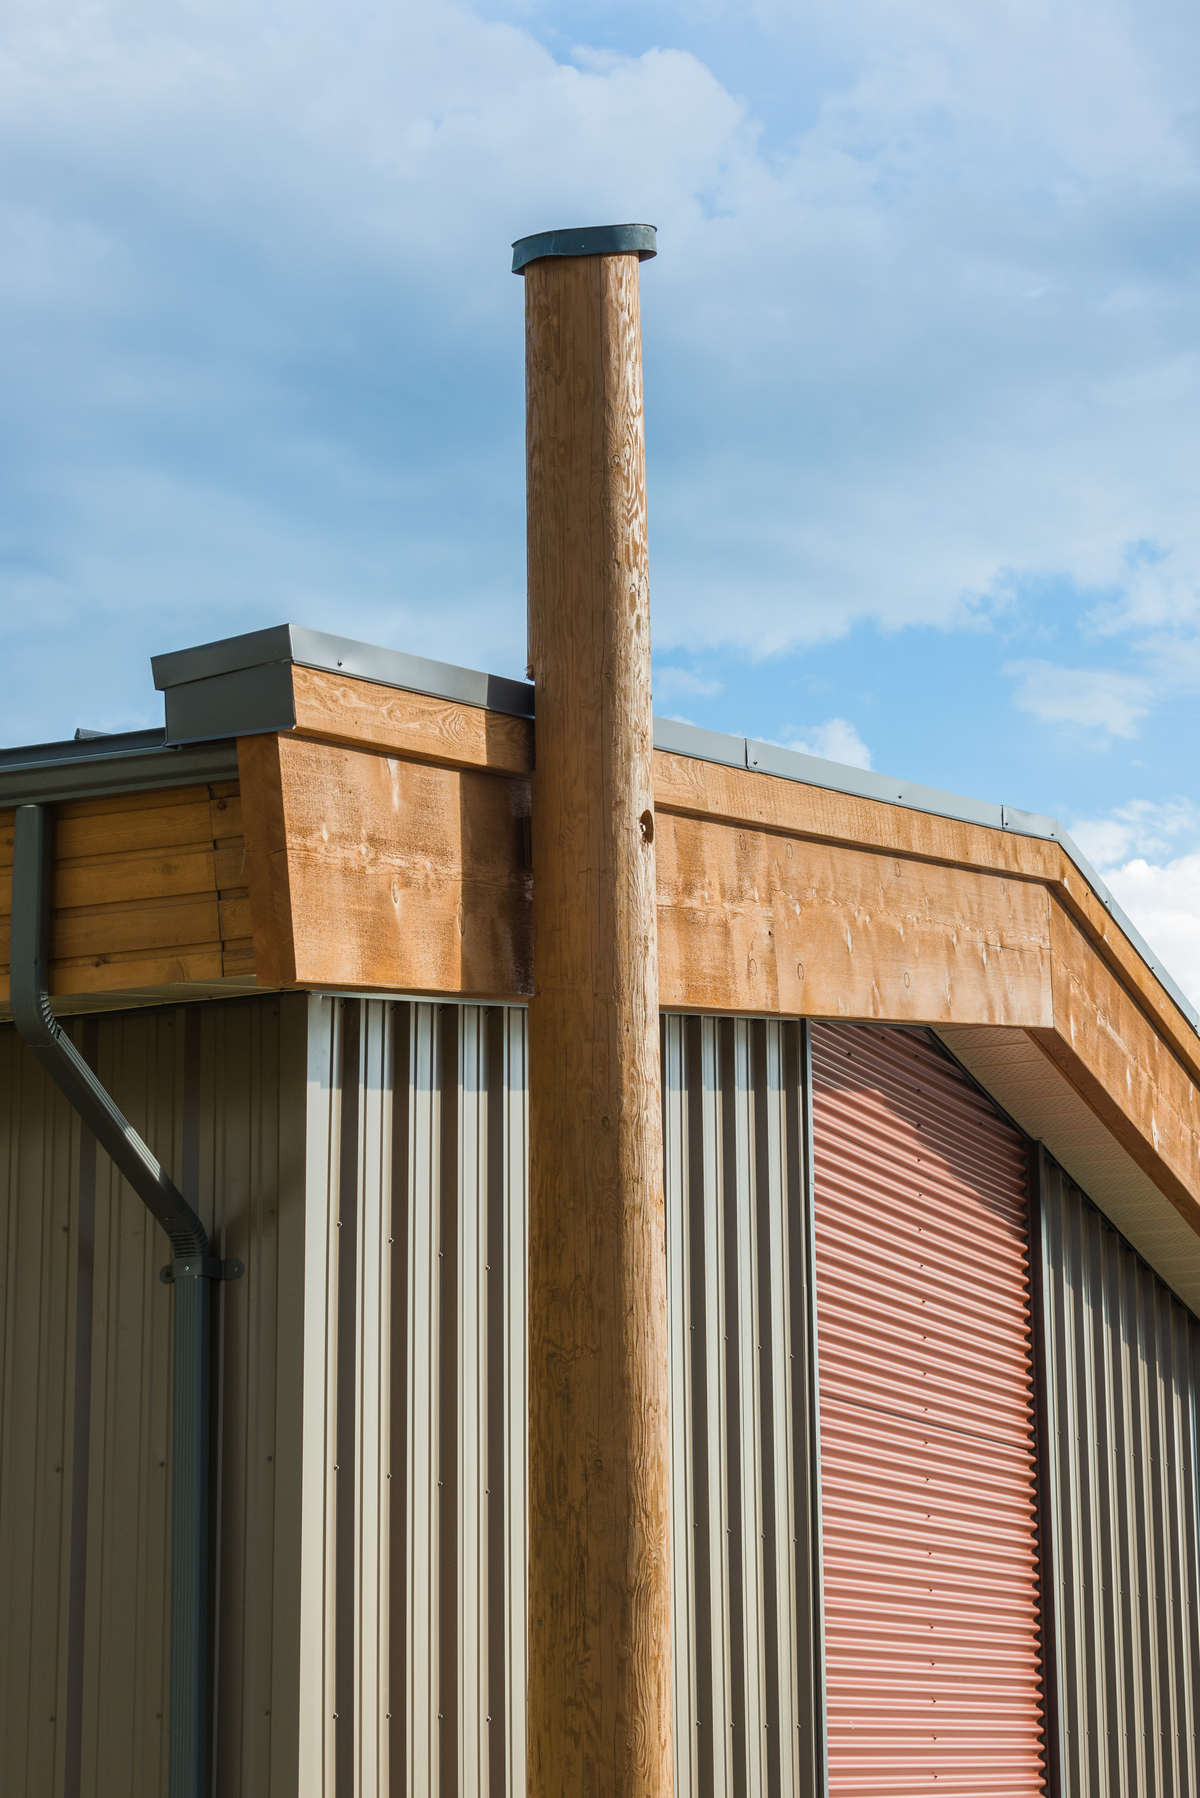 Exterior afternoon view of modular passive house / high performance Bella Bella Staff Housing, showing close up of vertical log pole and side of building with steel and solid-sawn heavy timber